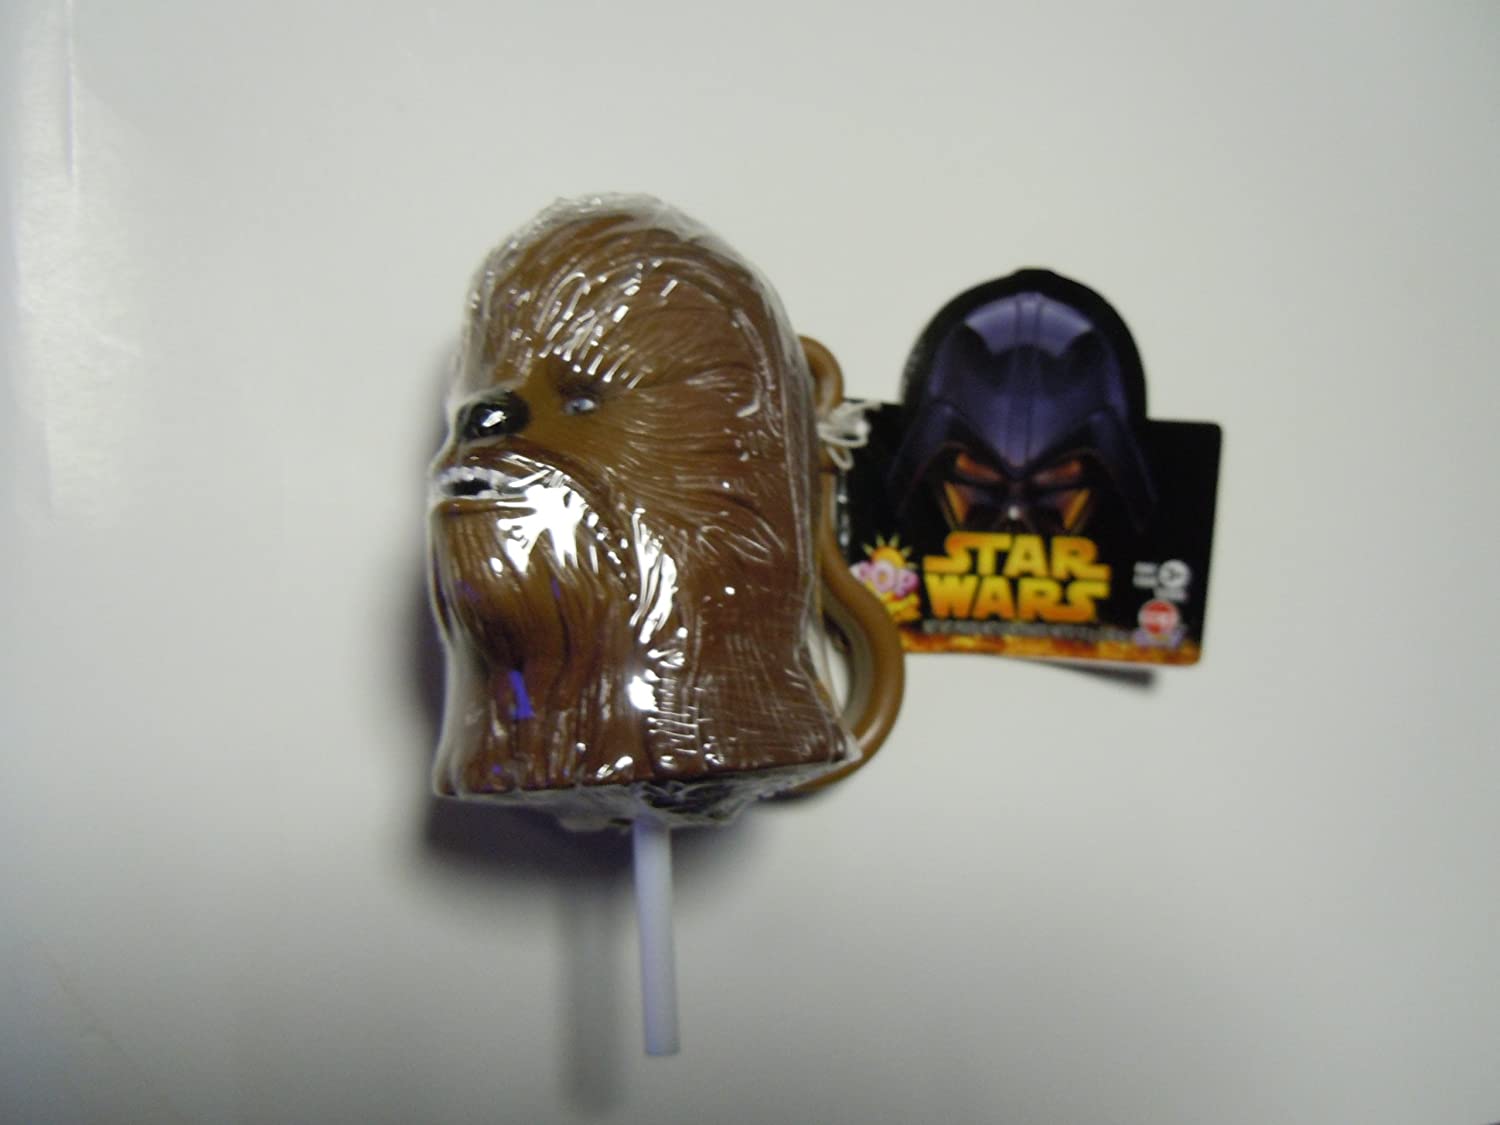 Star Wars: Chewbacca Lollipop Pop Candy Toppers Toy Figure